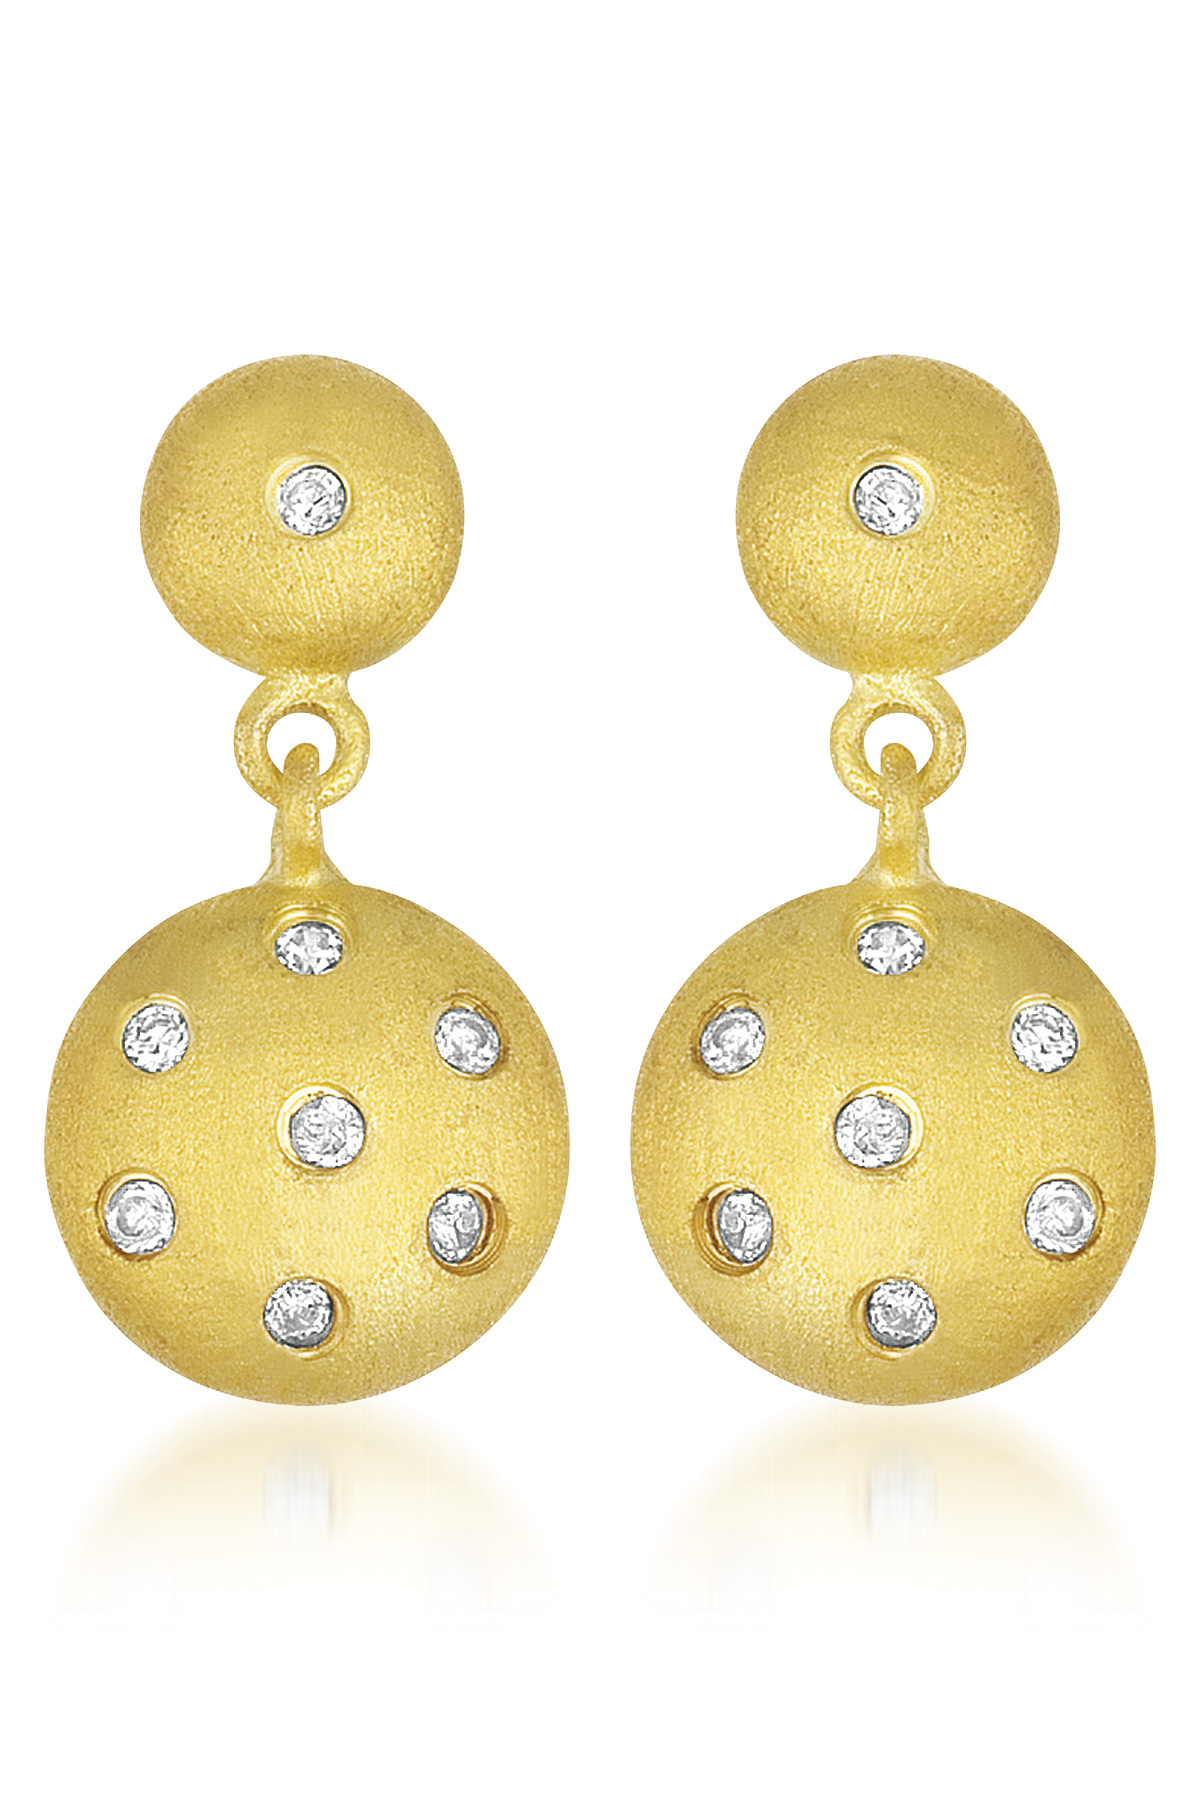 Cubic Zirconia (.925) Sterling Silver Sterling Silver Gold Plated Round Drop Earrings